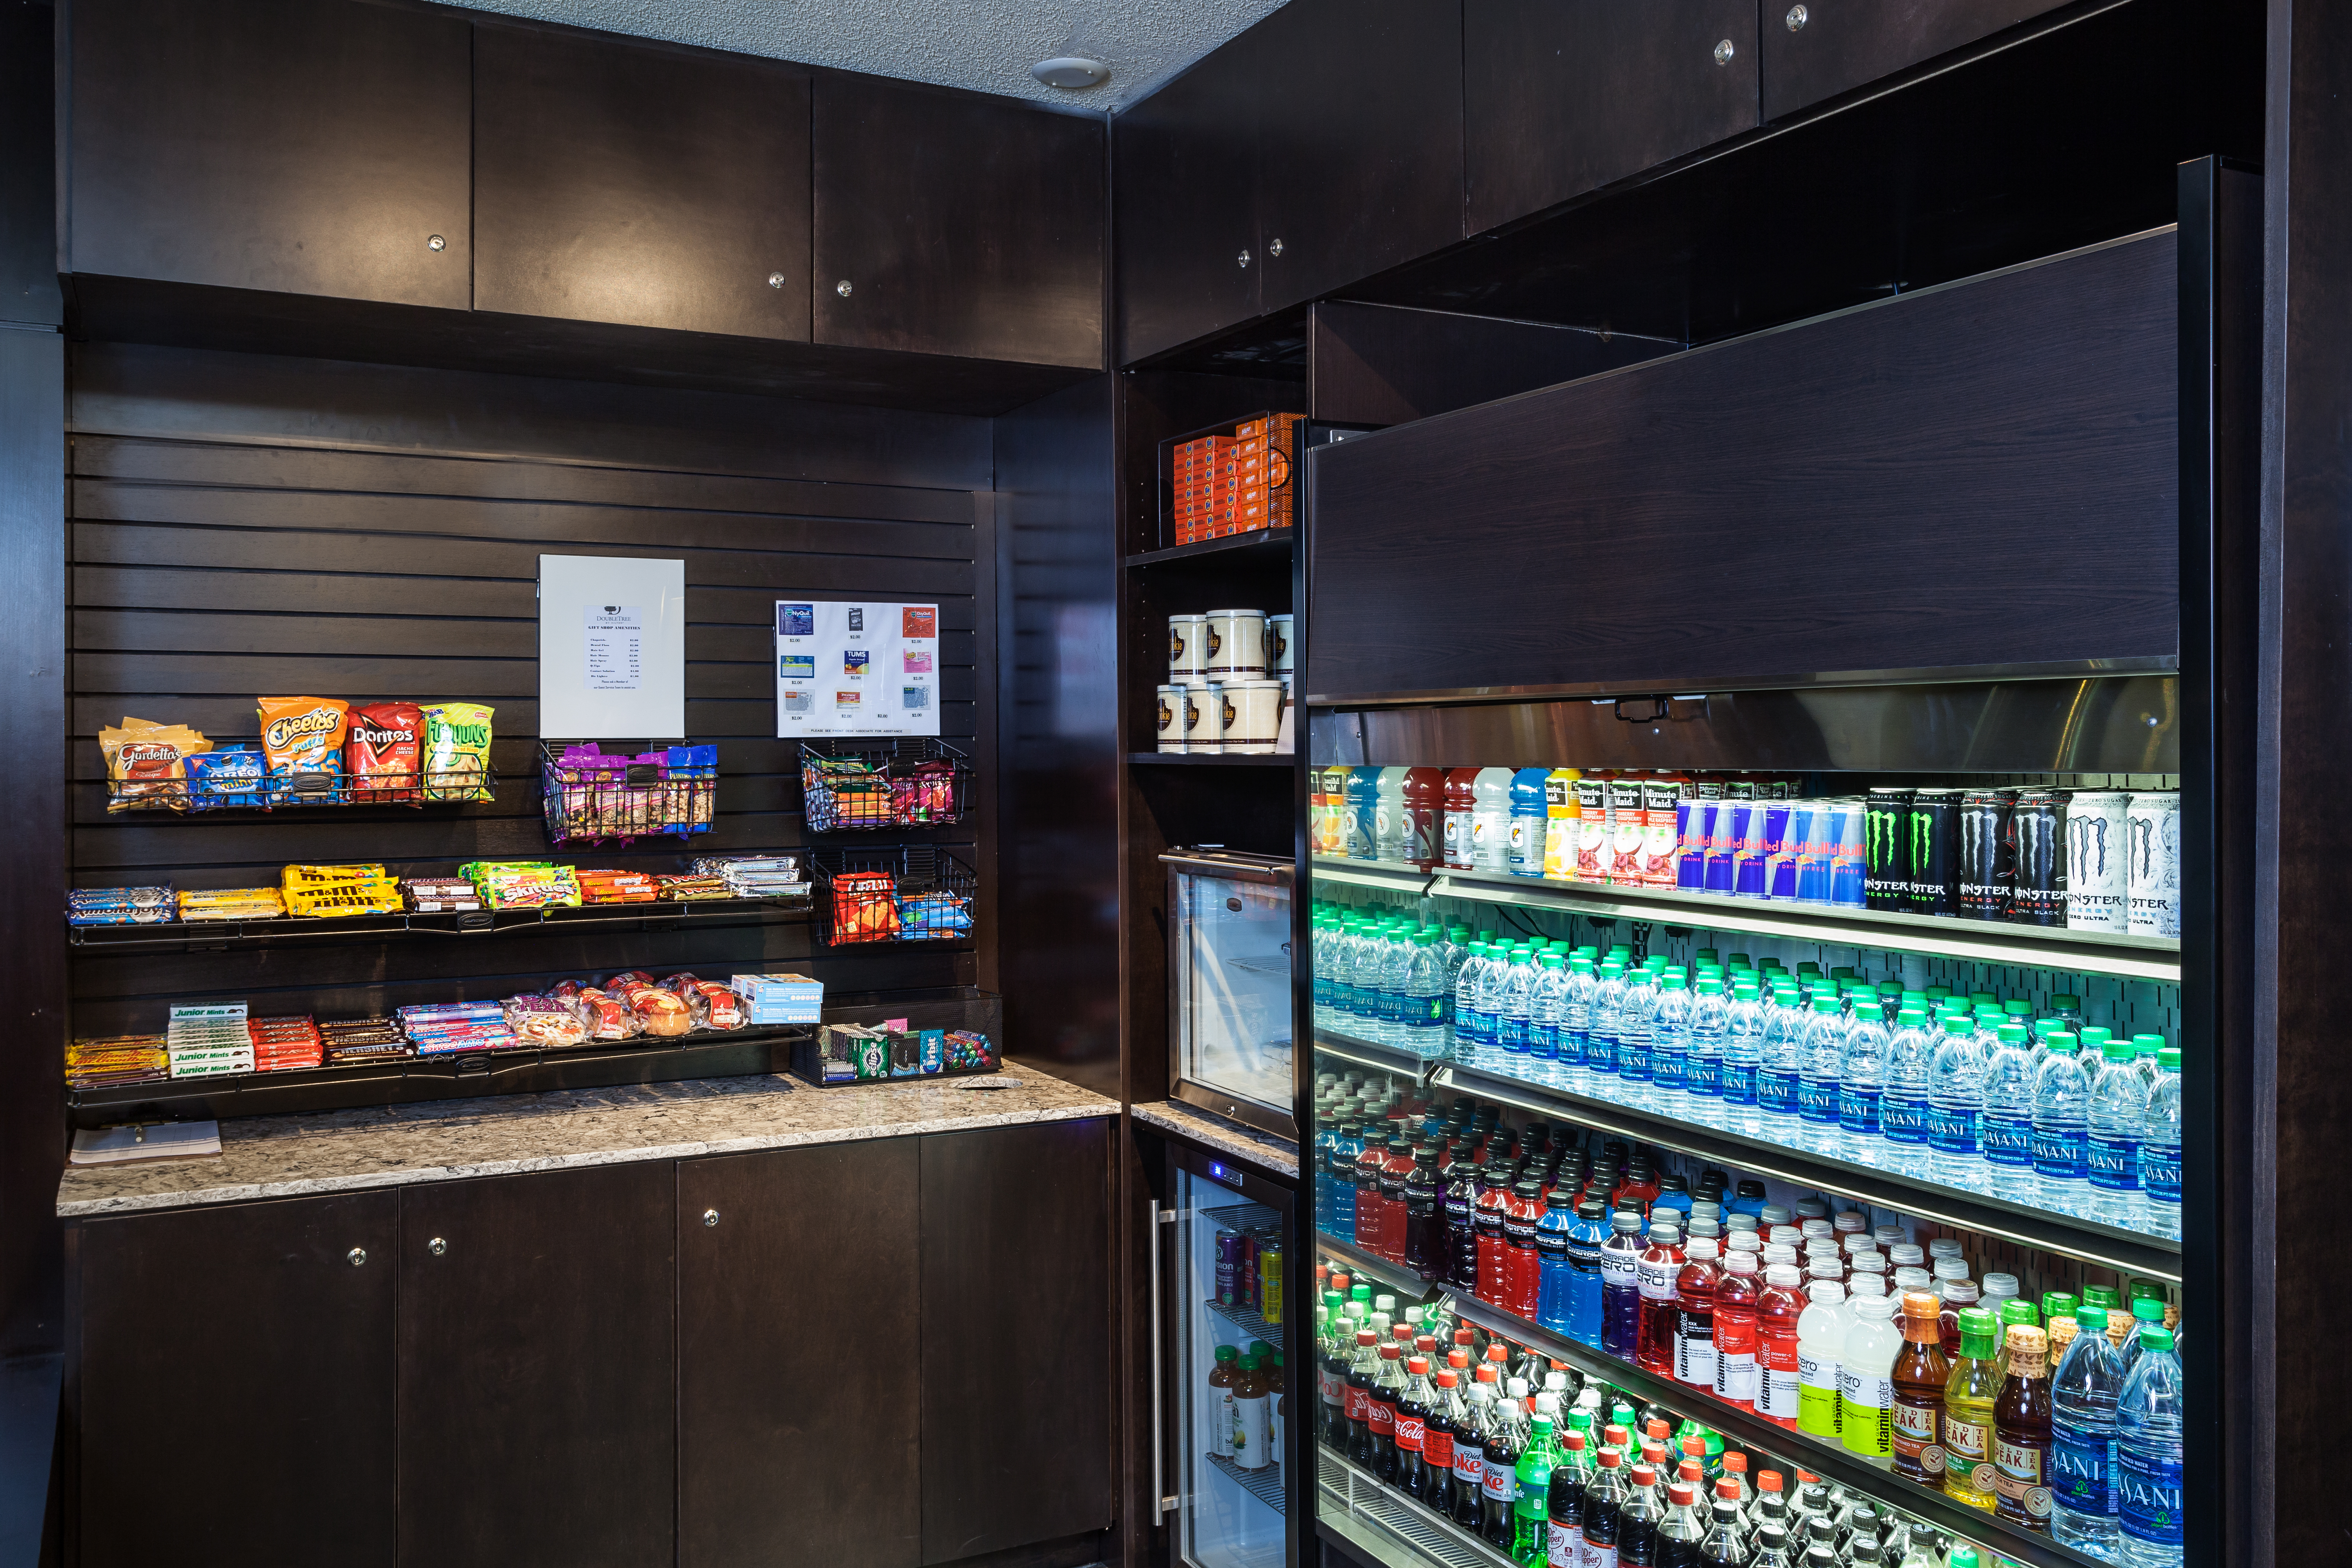 Convenience Items, Snack and Beverage Selections for Purchase at the Snack Shop